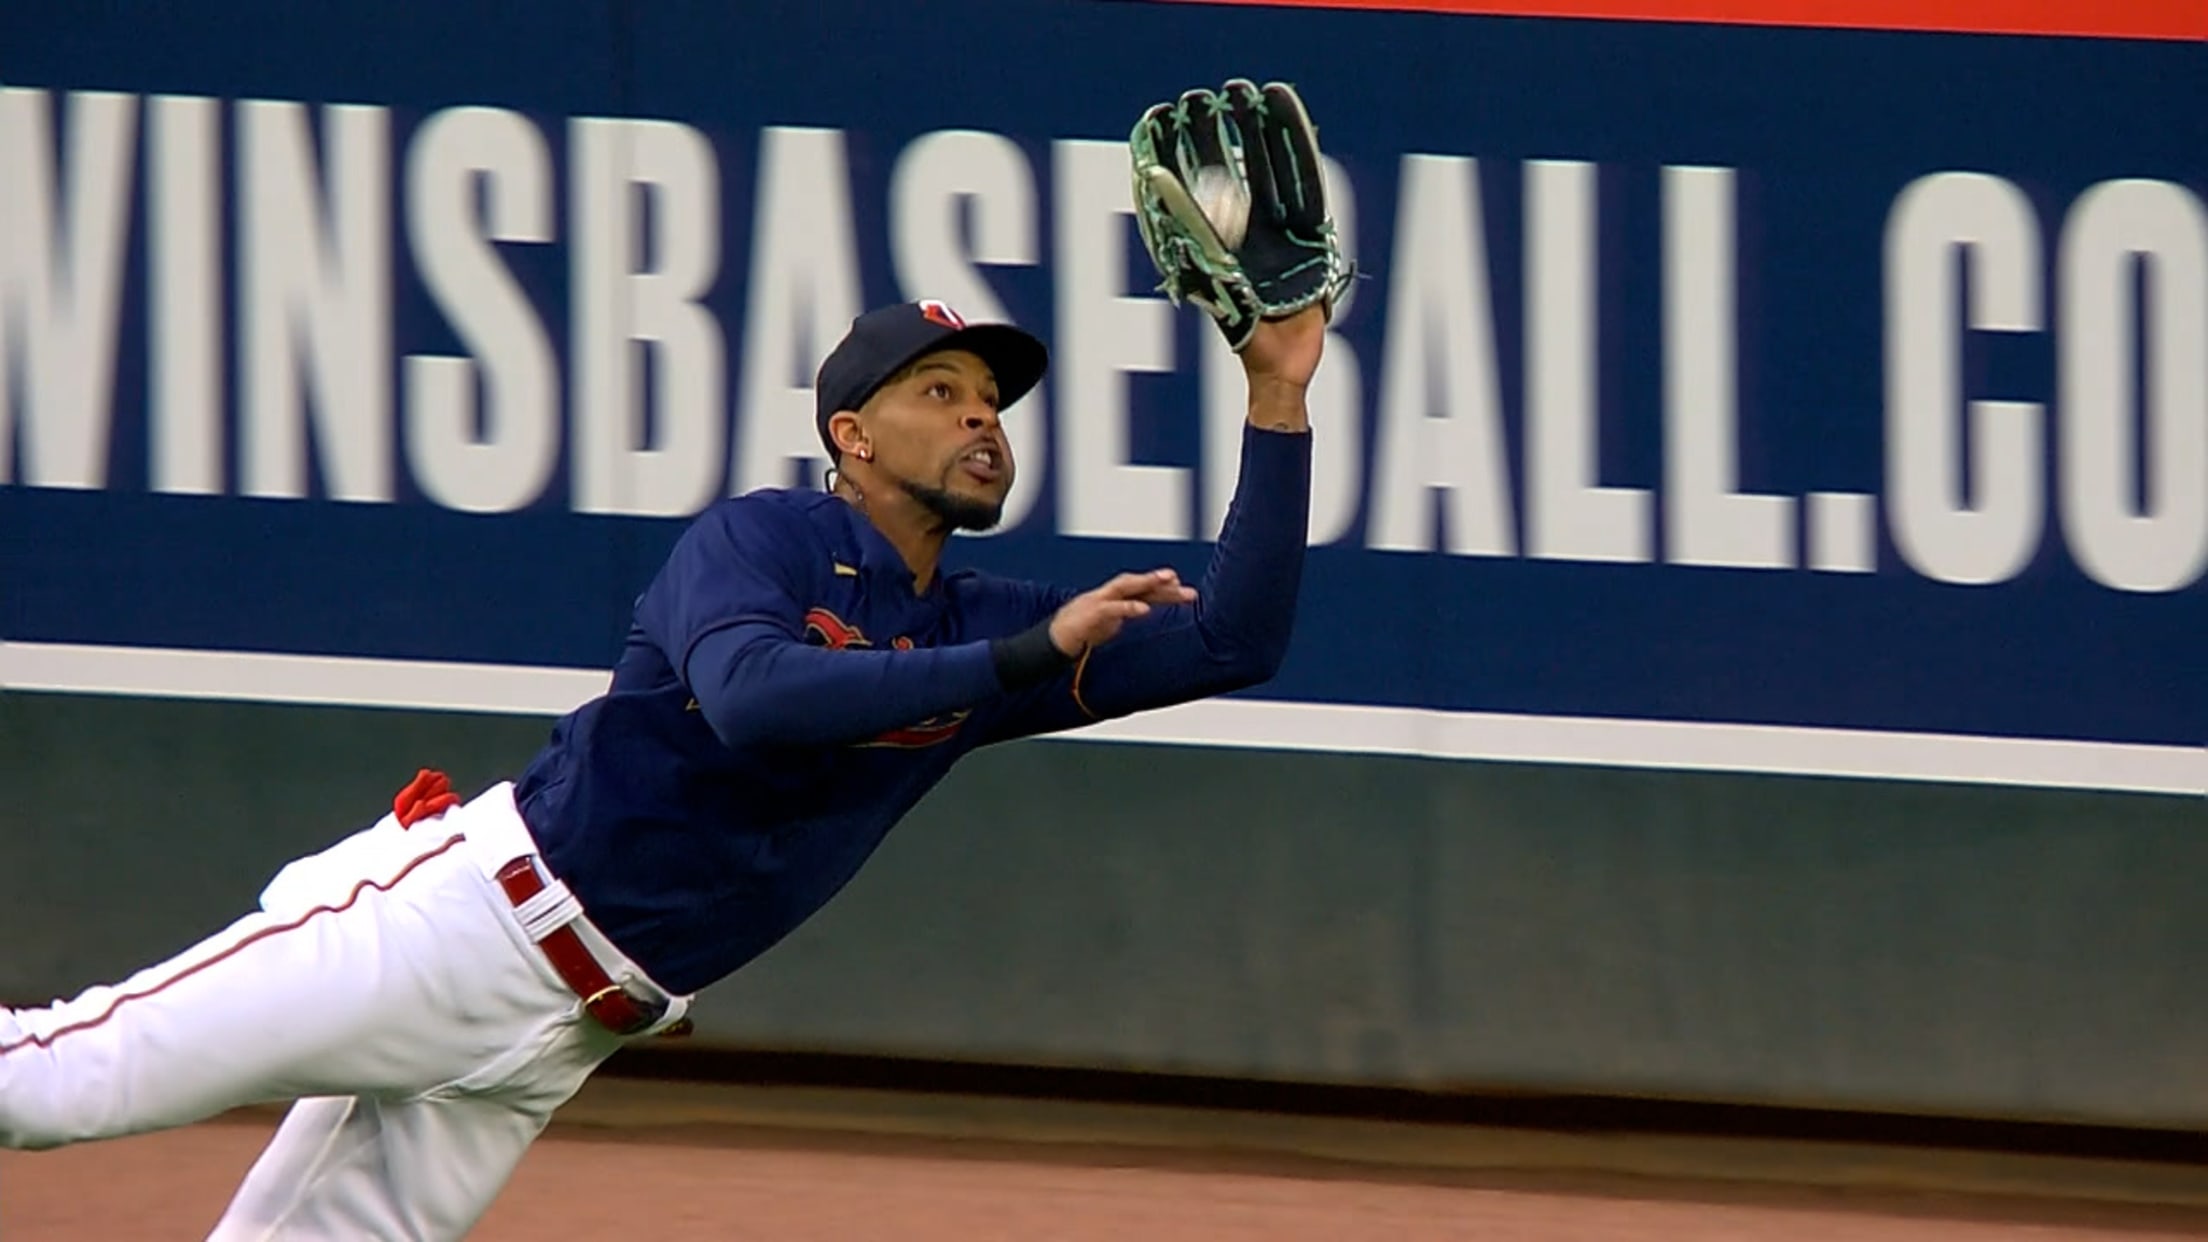 Byron Buxton's impossible catch, 07/08/2022